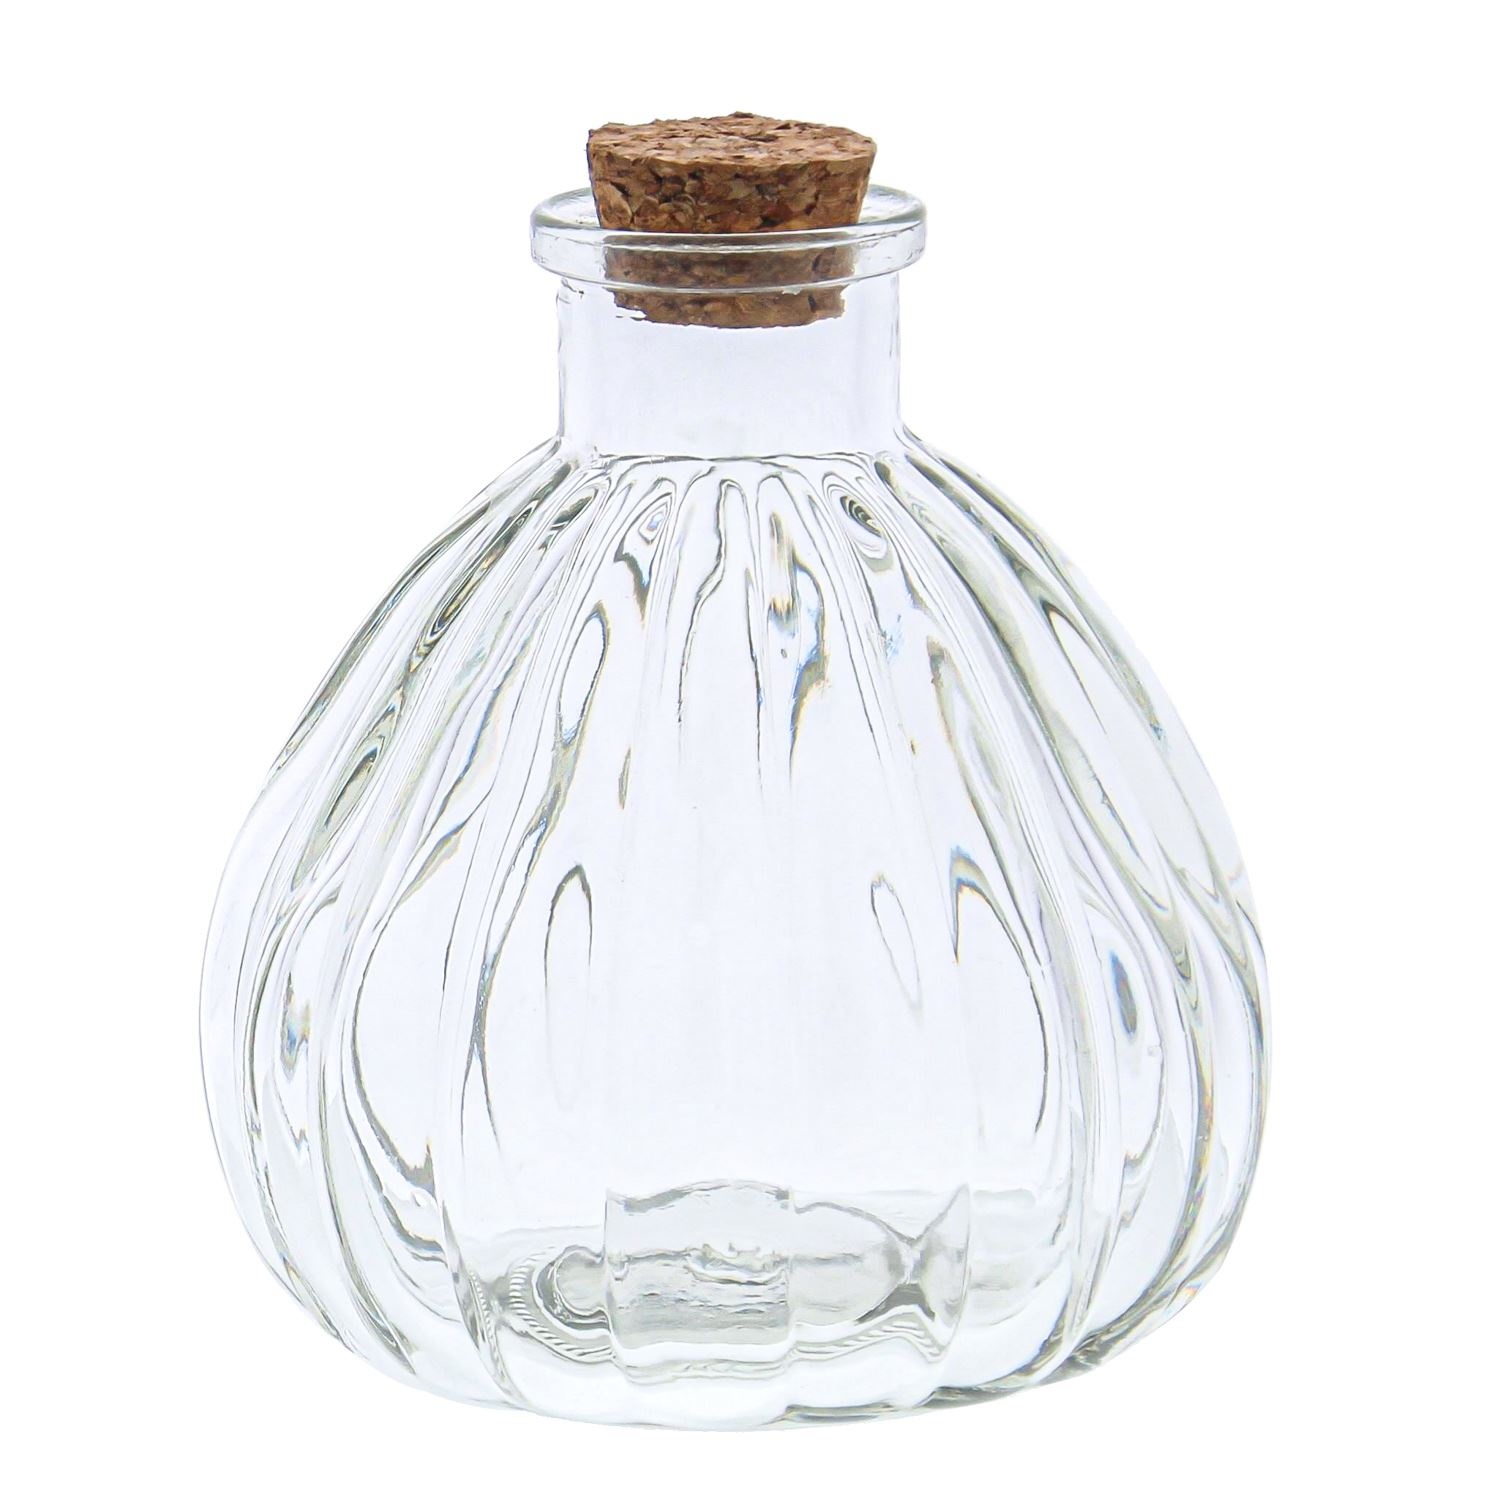 Bottle ribbed with cork - 85*85*100 mm - 72 pieces